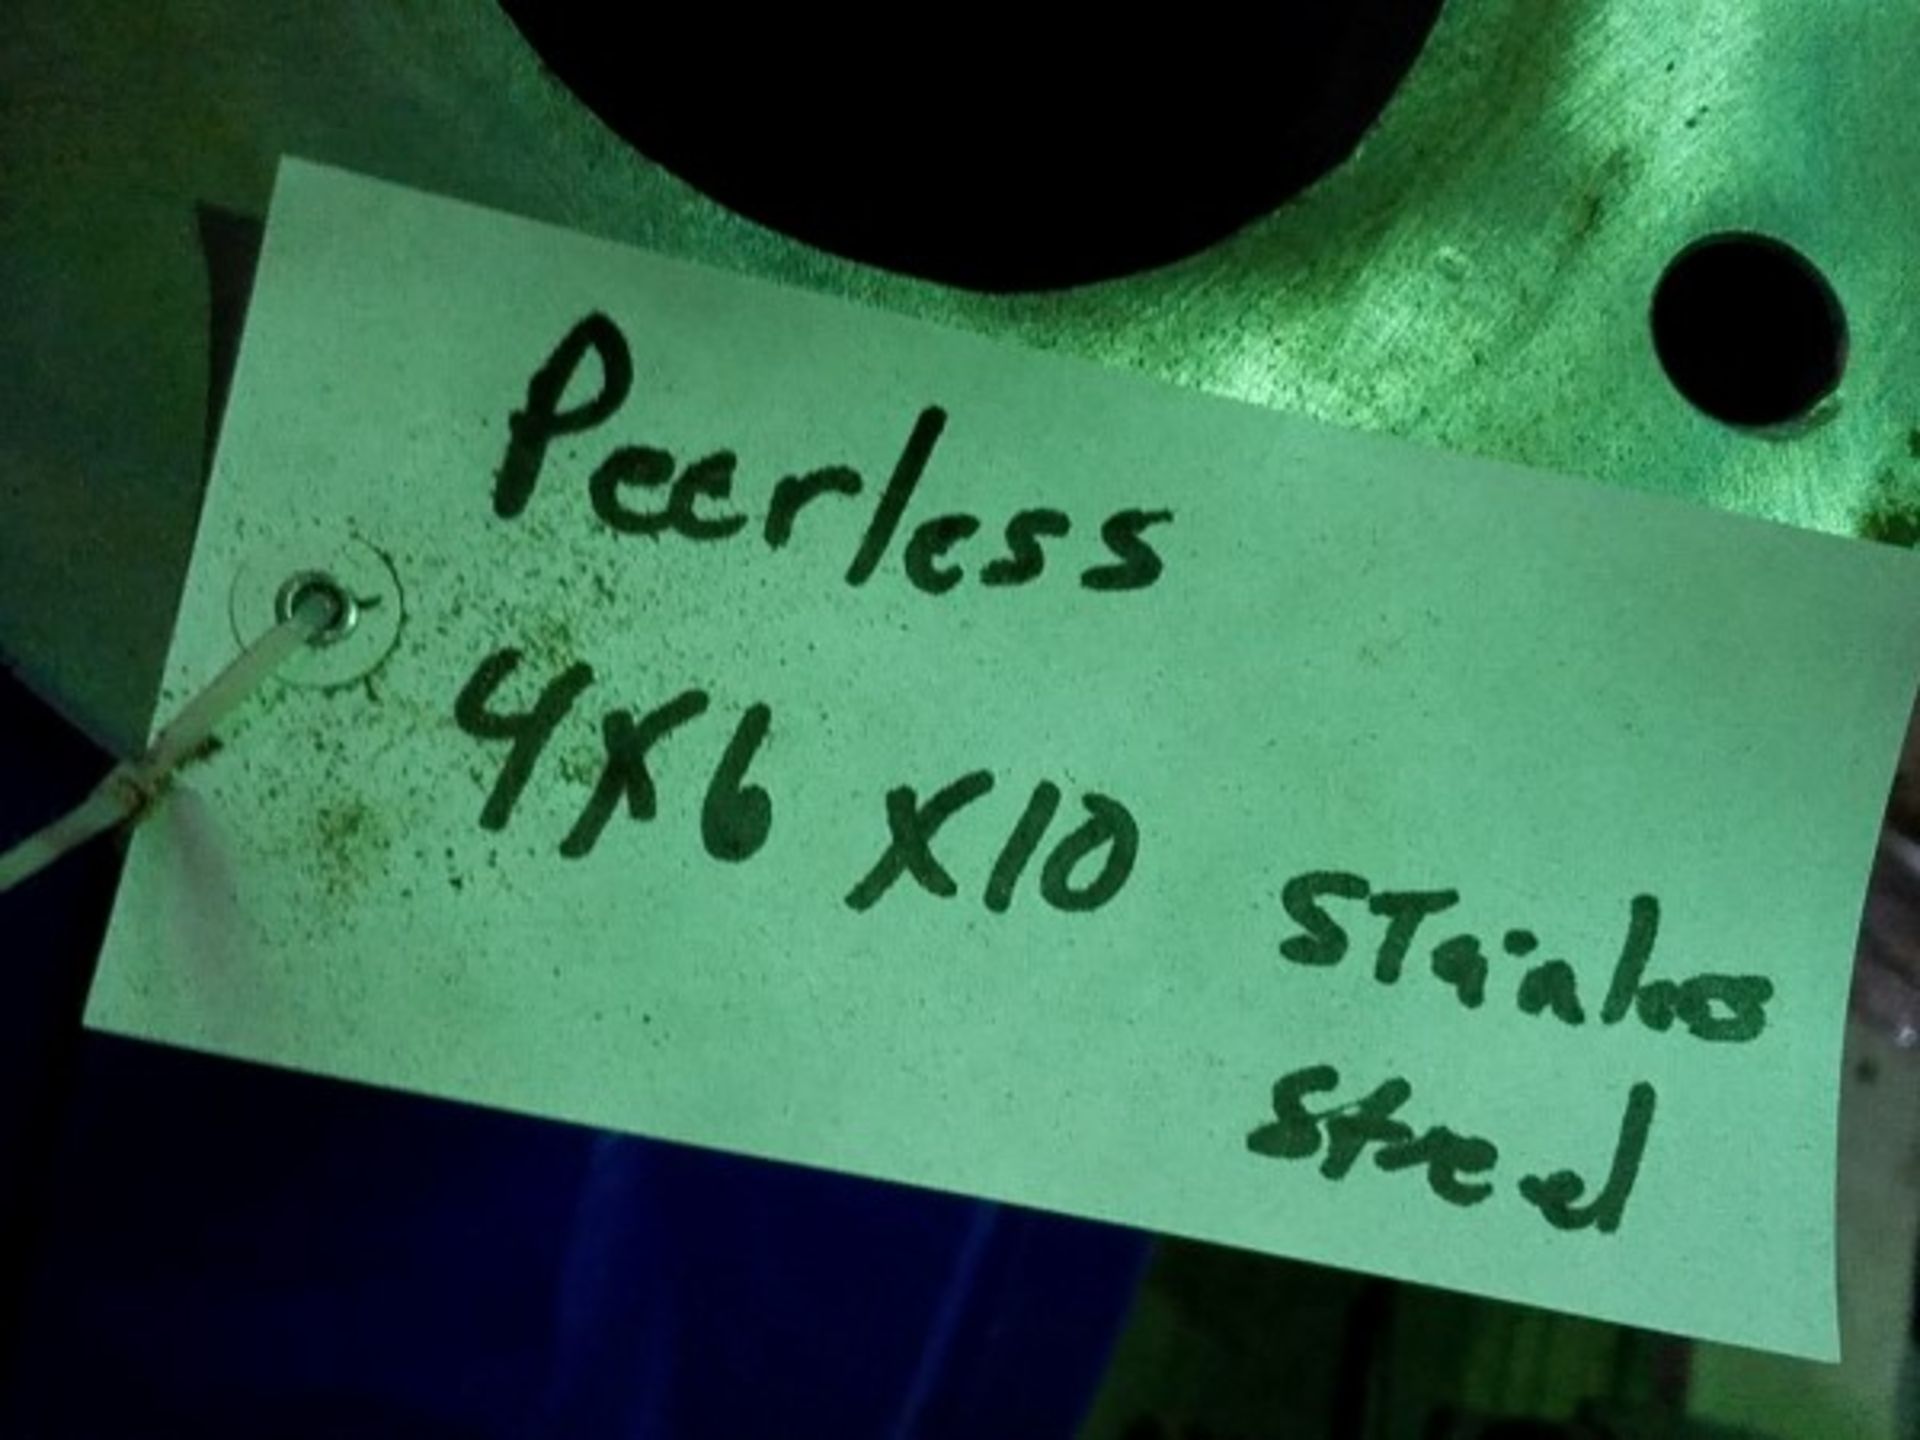 Peerless 4 x 6 x 10 Stainless Pump | Seller to load for $10 per lot or buyers may remove hand - Image 2 of 2